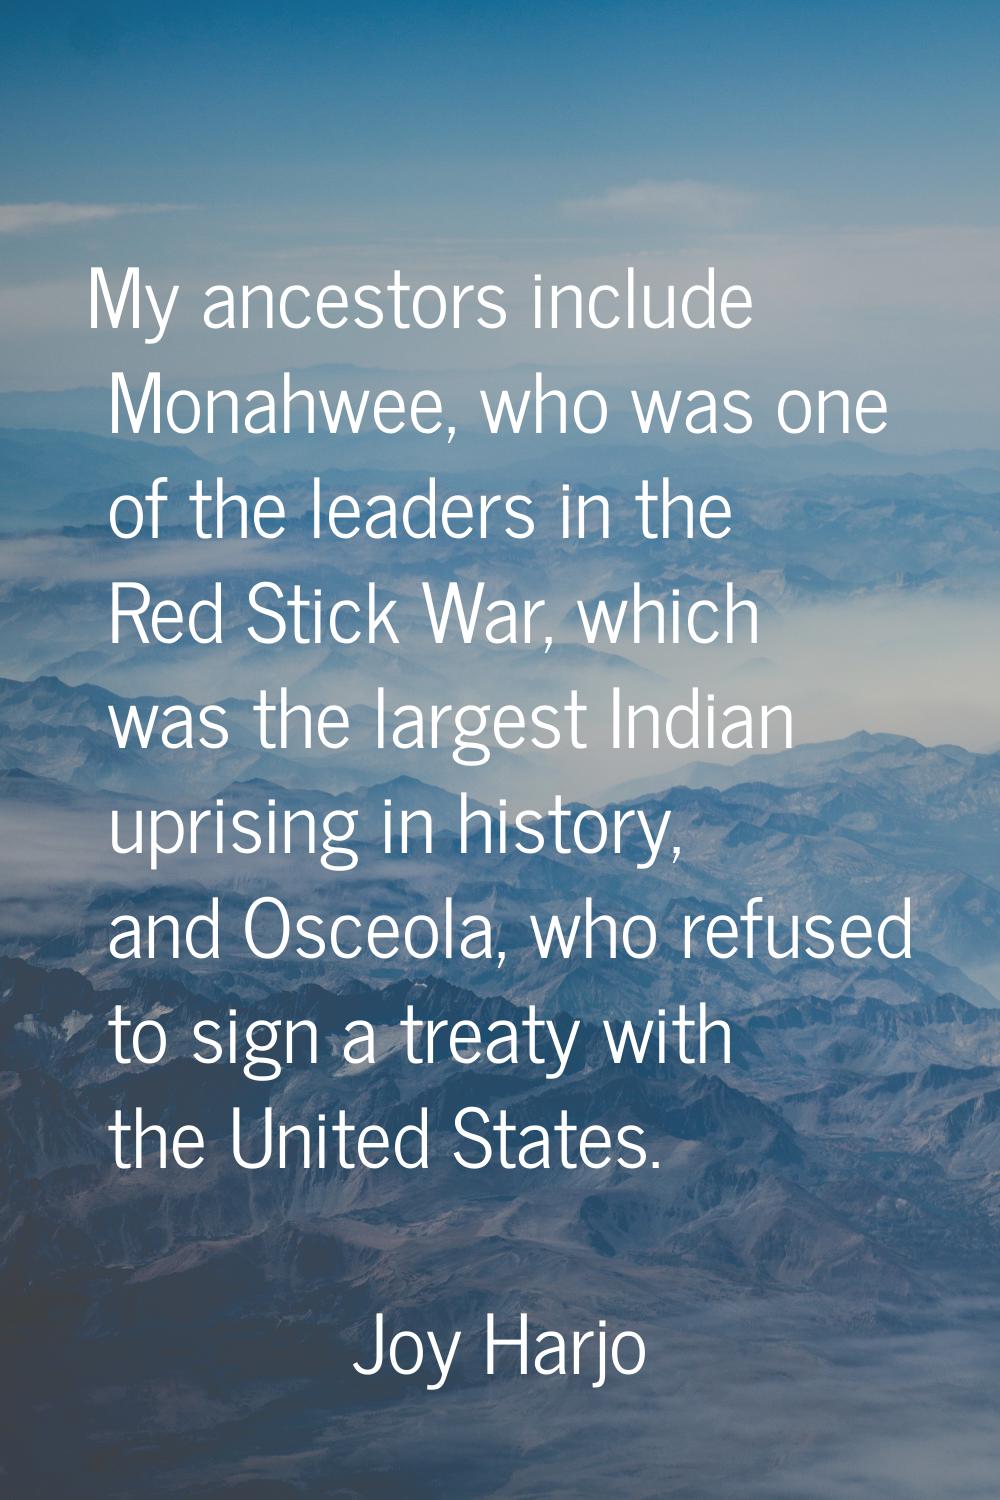 My ancestors include Monahwee, who was one of the leaders in the Red Stick War, which was the large